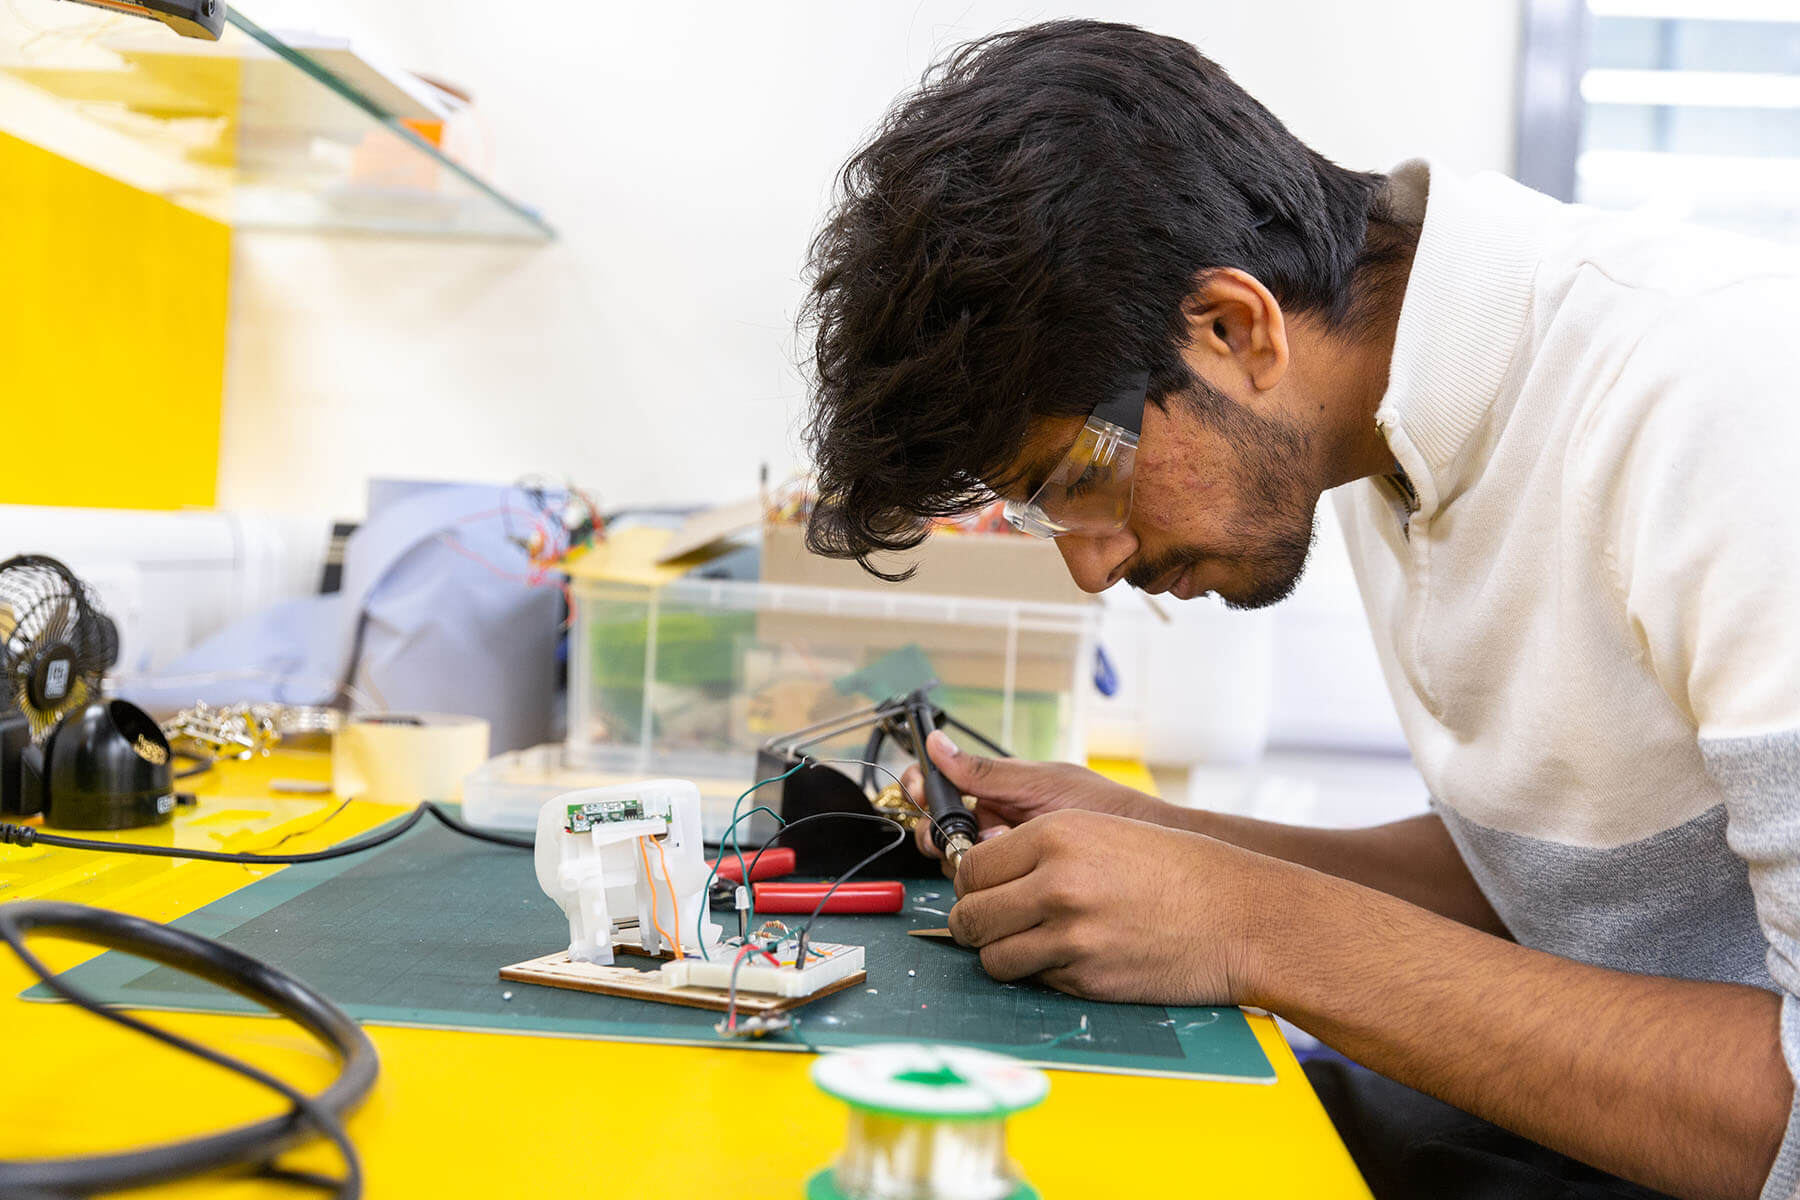 Male student working on electronic parts in workshop